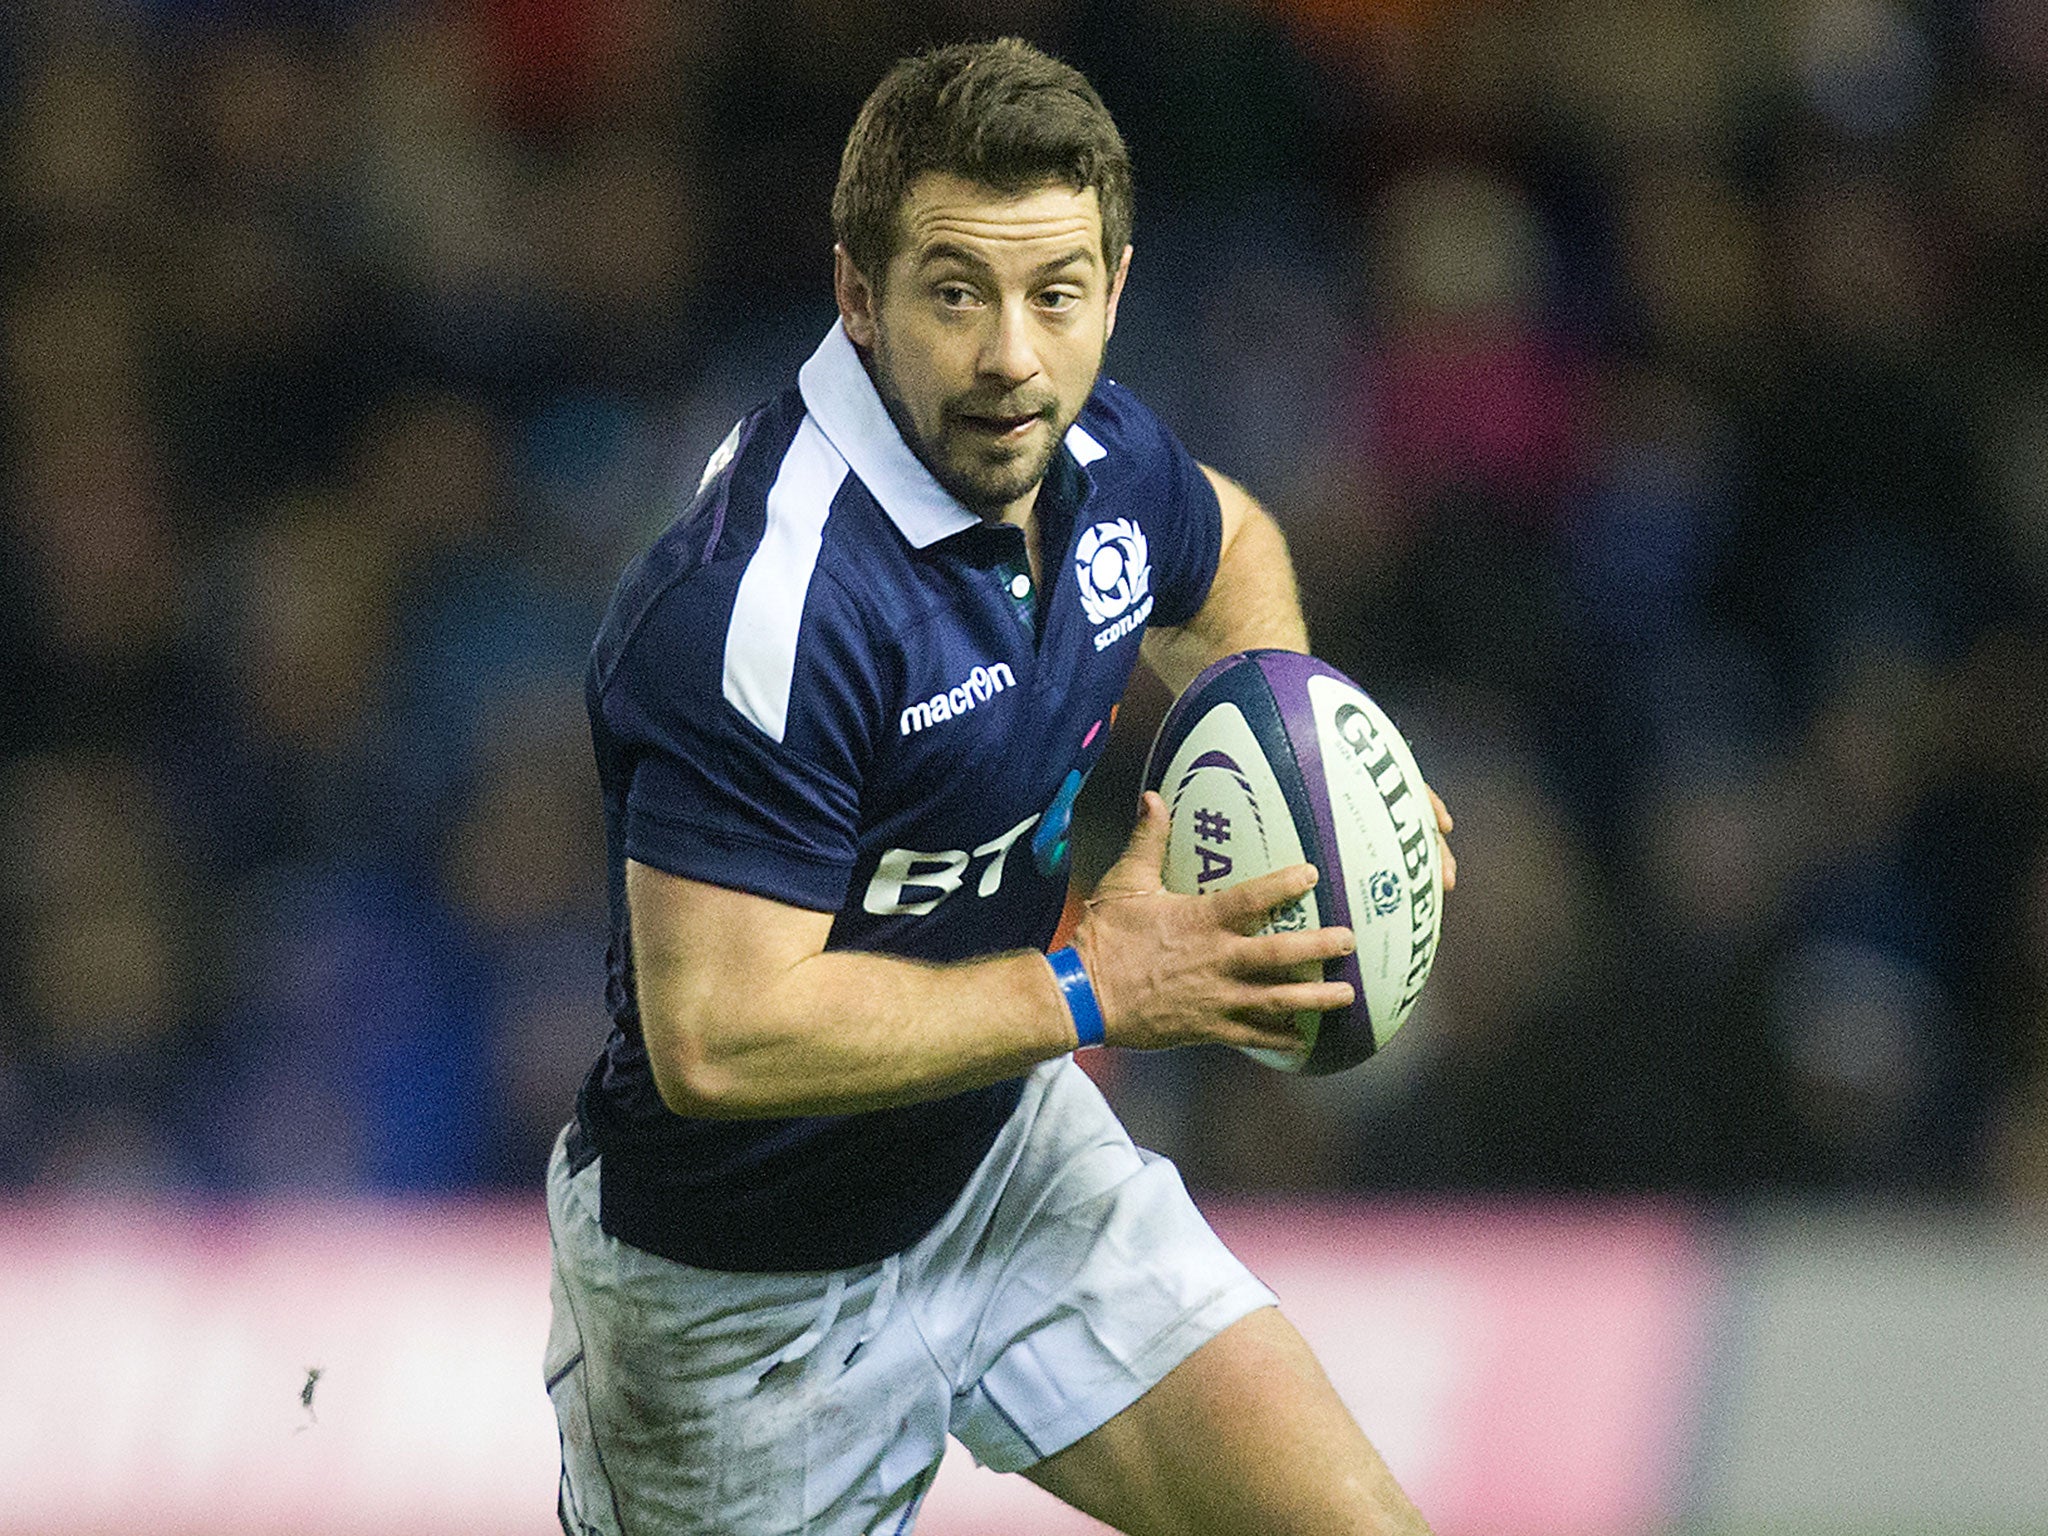 Grieg Laidlaw wants Scotland to make a fast start to this year's Six Nations tournament